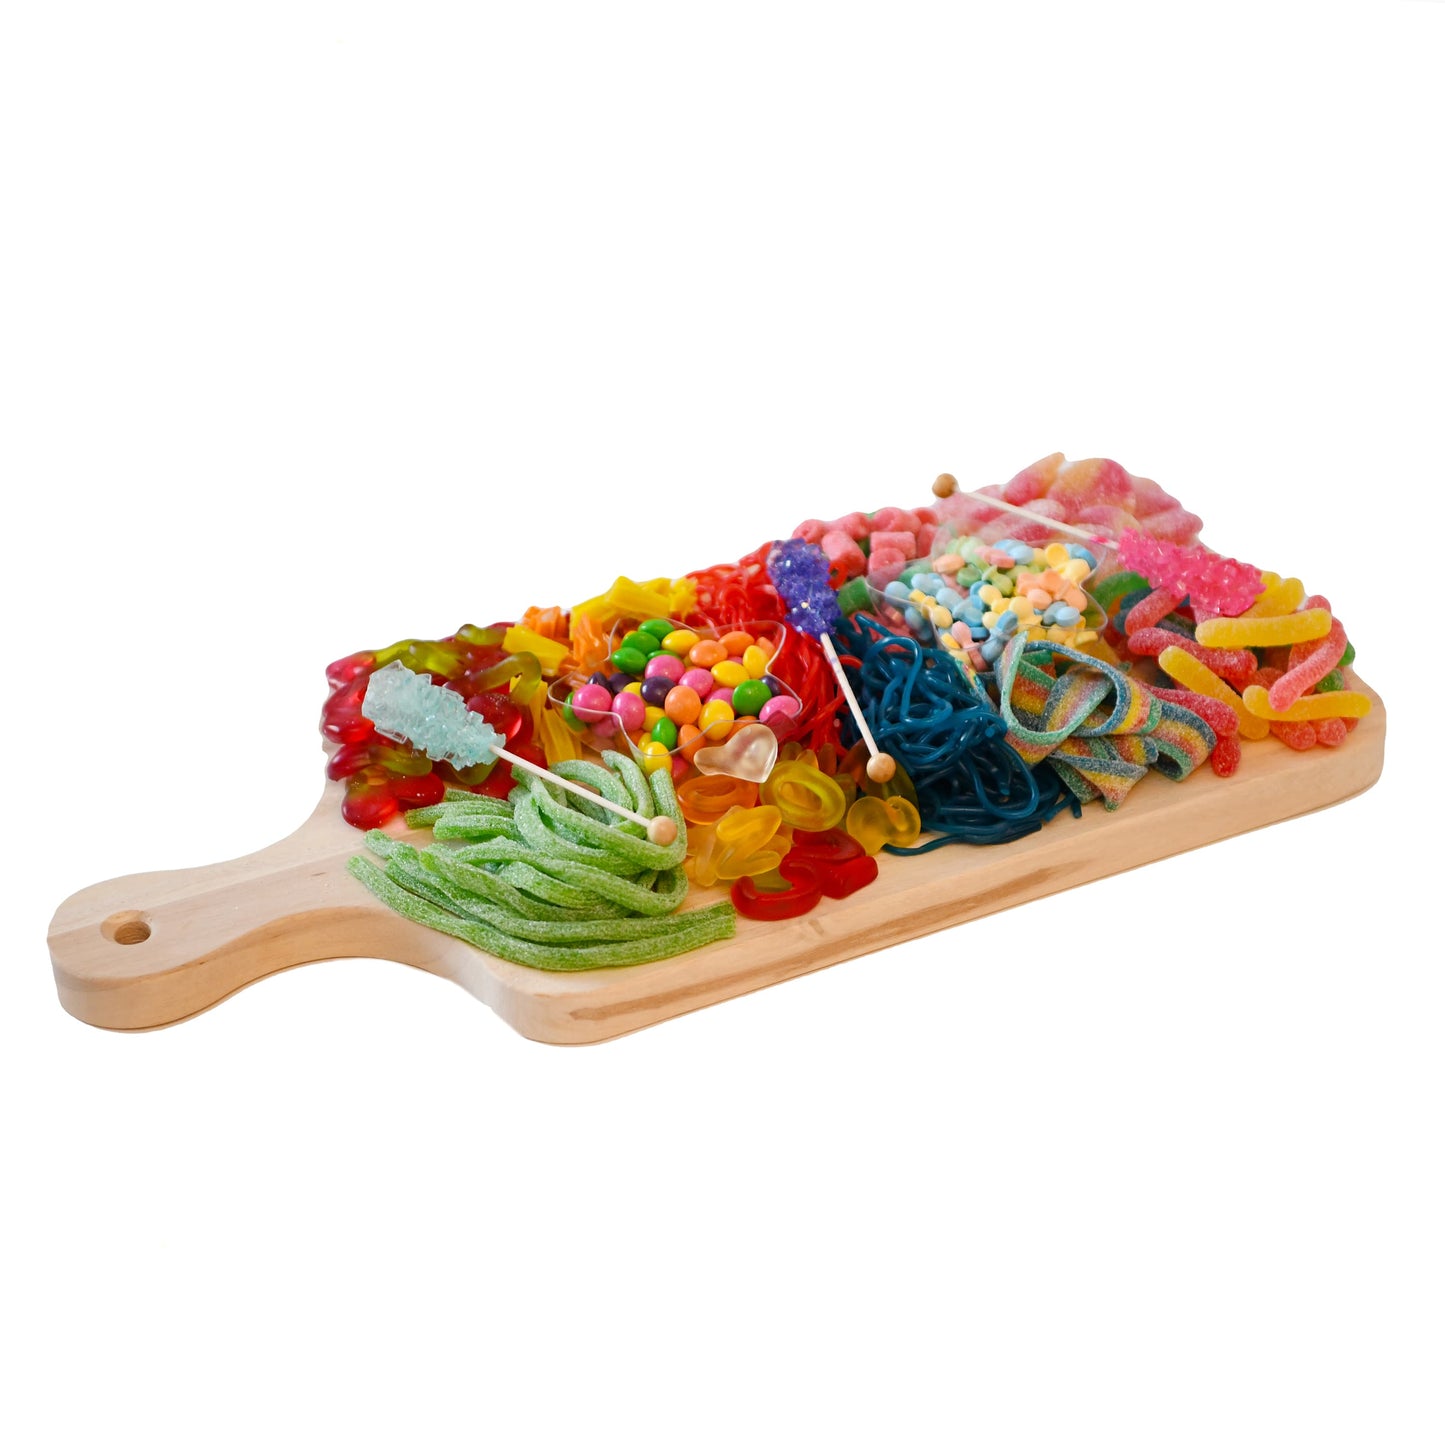 OG candy charcuterie boards